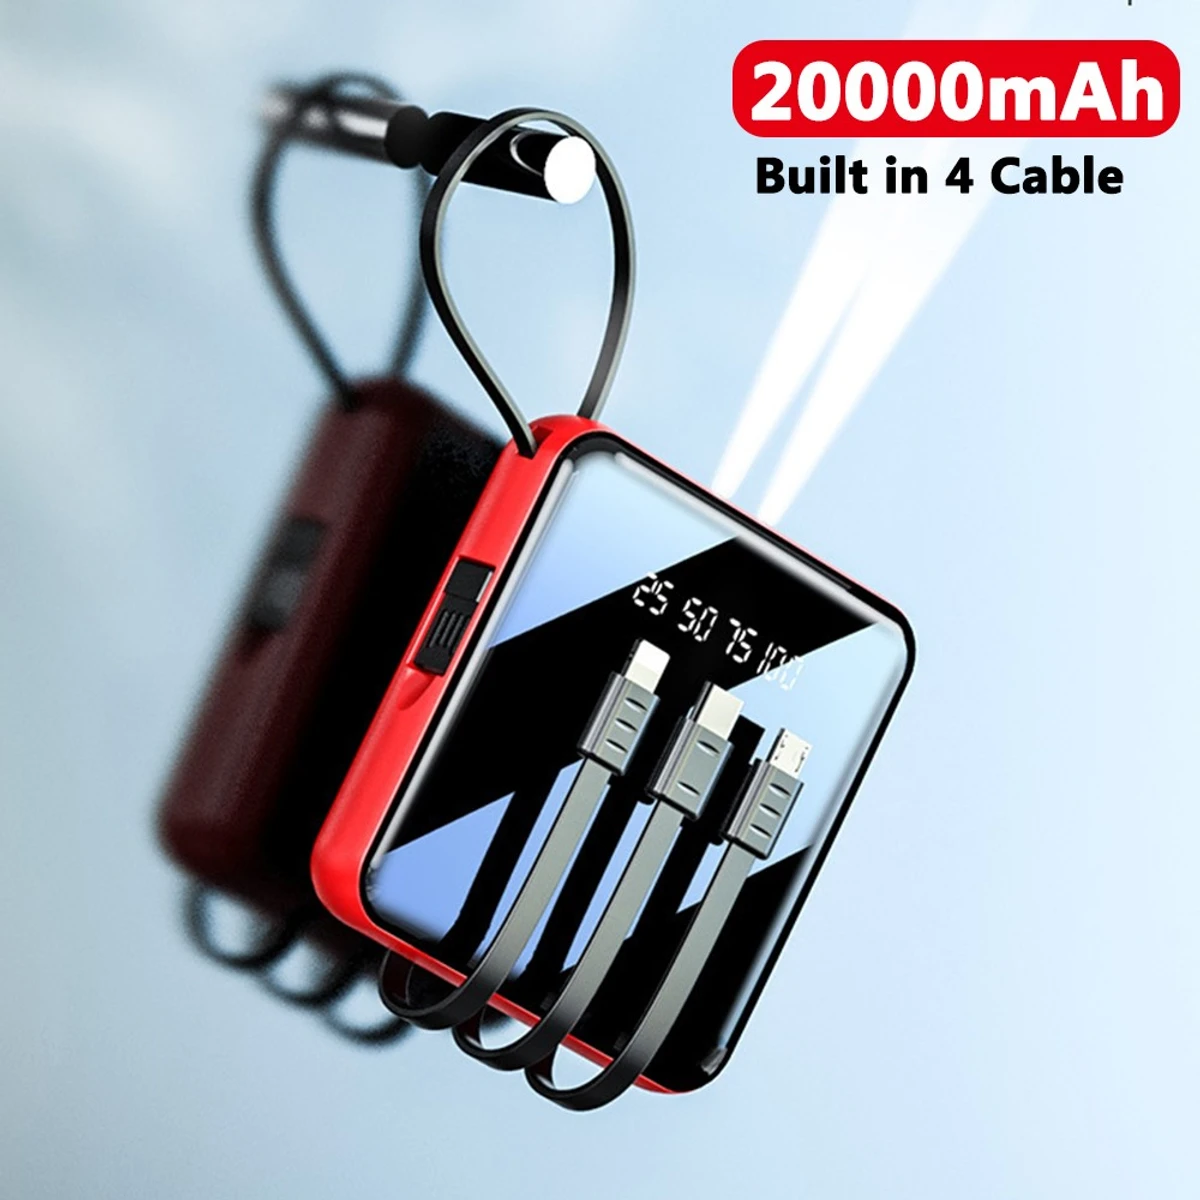 20000 MAH Power bank with LED Display and All in One Cable set